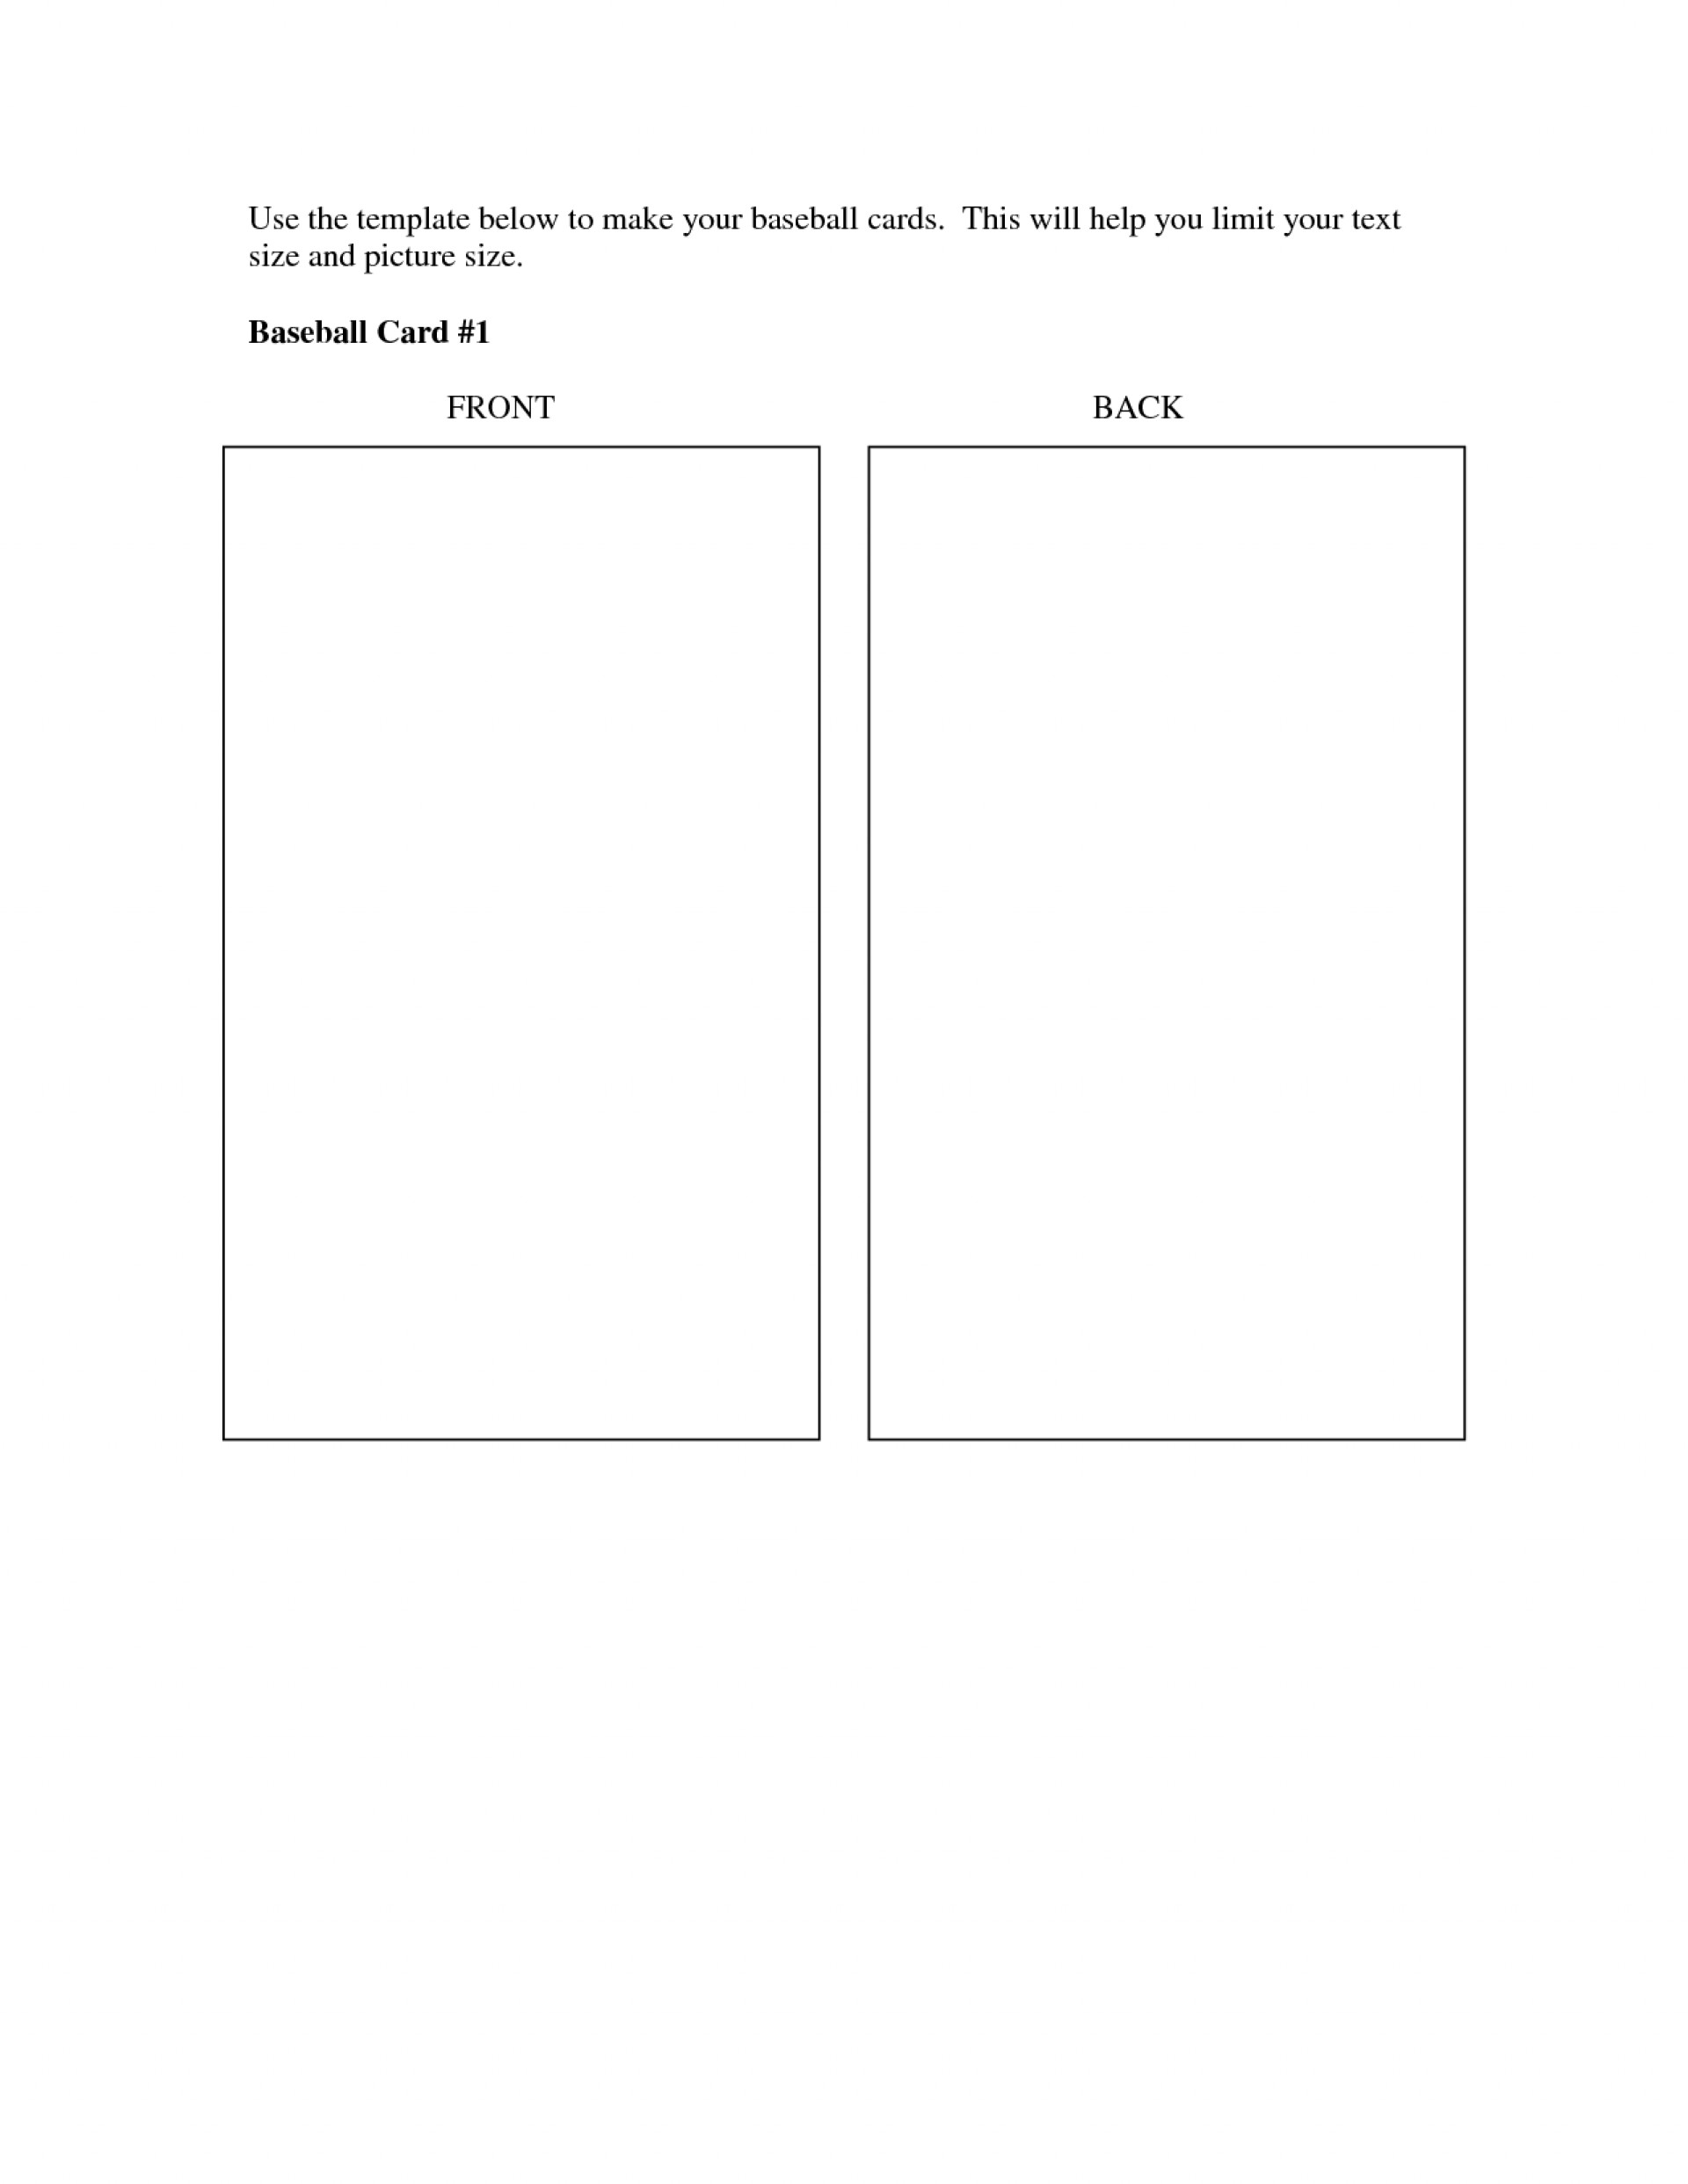 Baseball Card Size Template  Trading Remarkable Ideas regarding Baseball Card Size Template